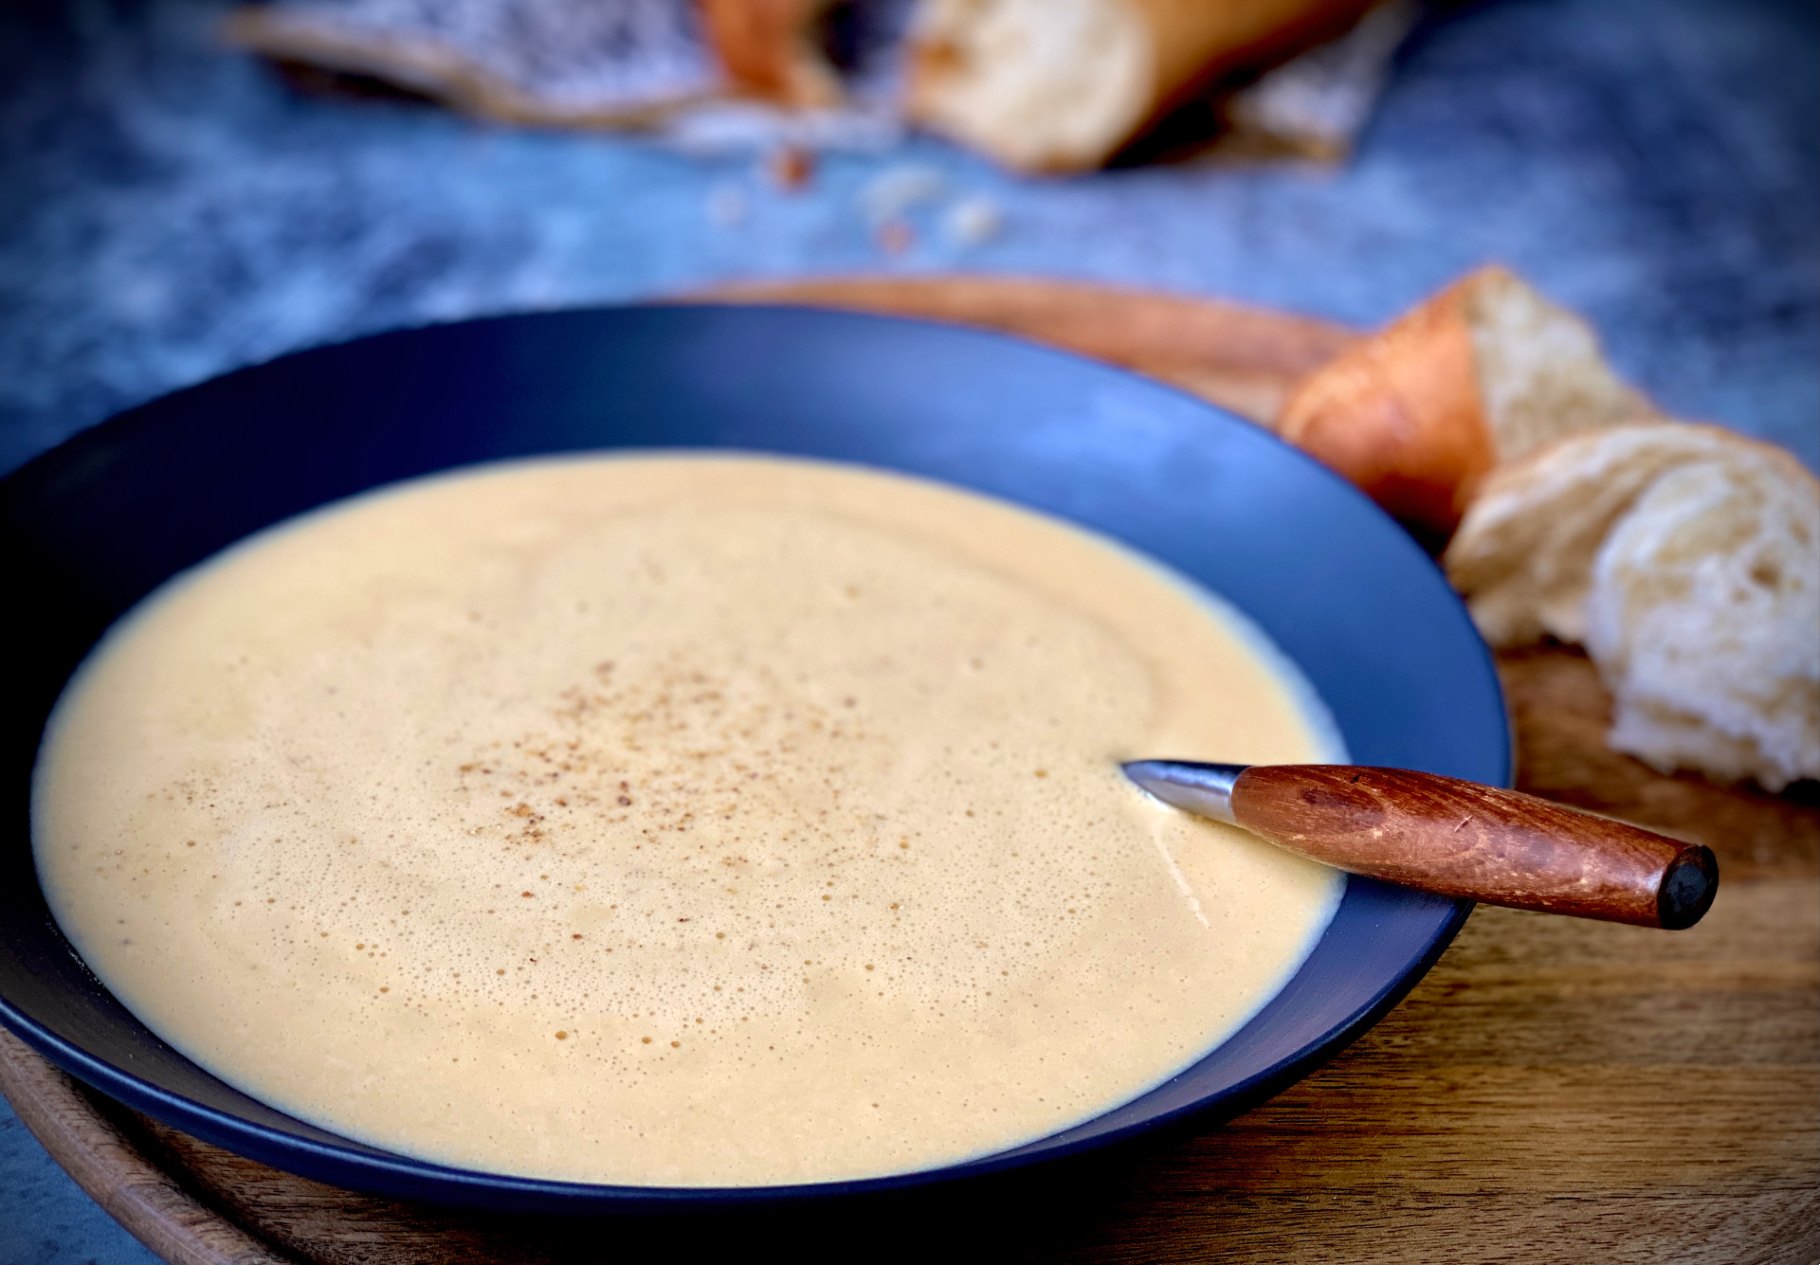 Creamy cheese soup in a bowl with hunks of bread on the side.